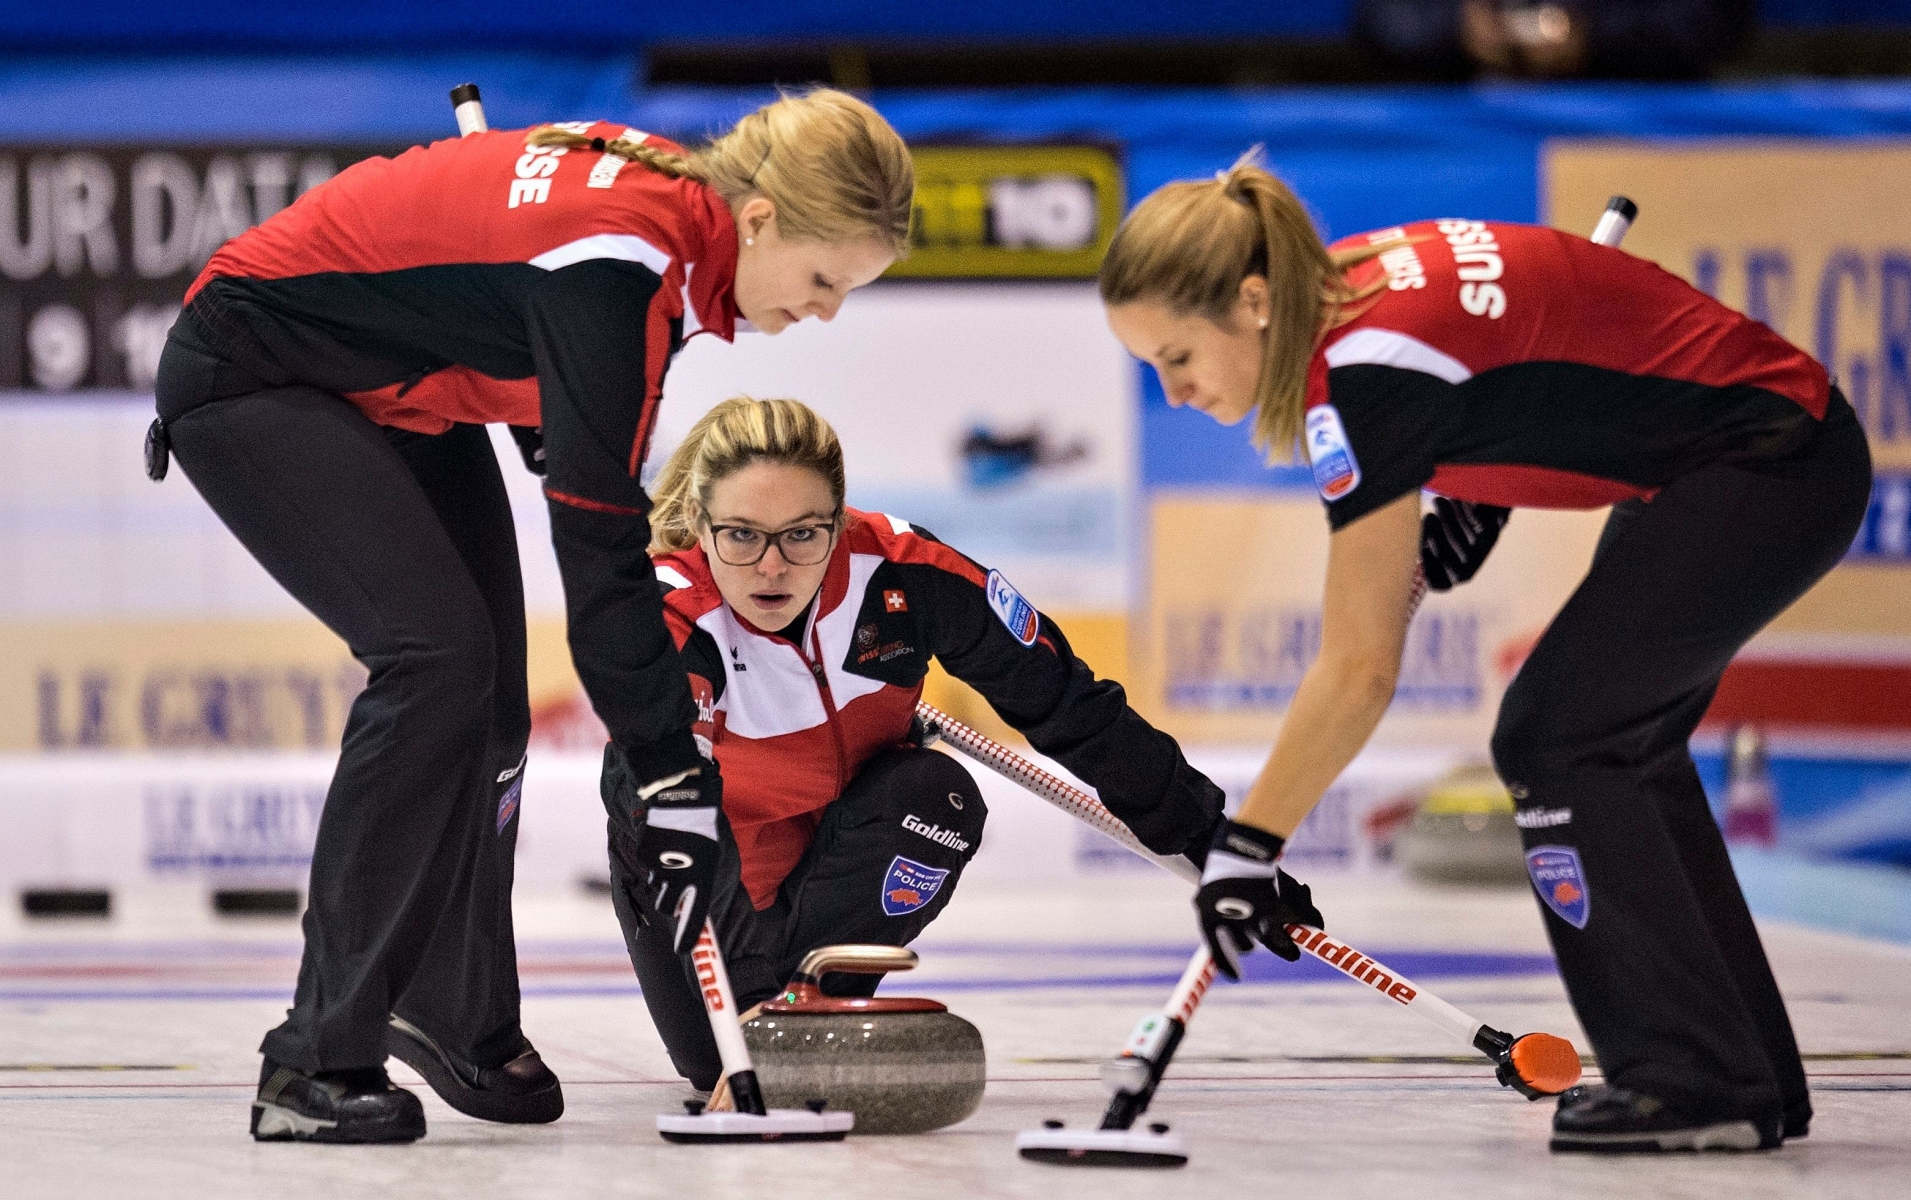 epa05035033 Marisa Winkelhausen (L), Alina Platz (C) and Nicole Schwaegli (R) from the Swiss National Curling Team in action on the first day of the 2015 European Curling Championships in Esbjerg, Denmark, 20 November 2015.  EPA/CLAUS FISKER DENMARK CURLING EUROPEAN CHAMPIONSHIP